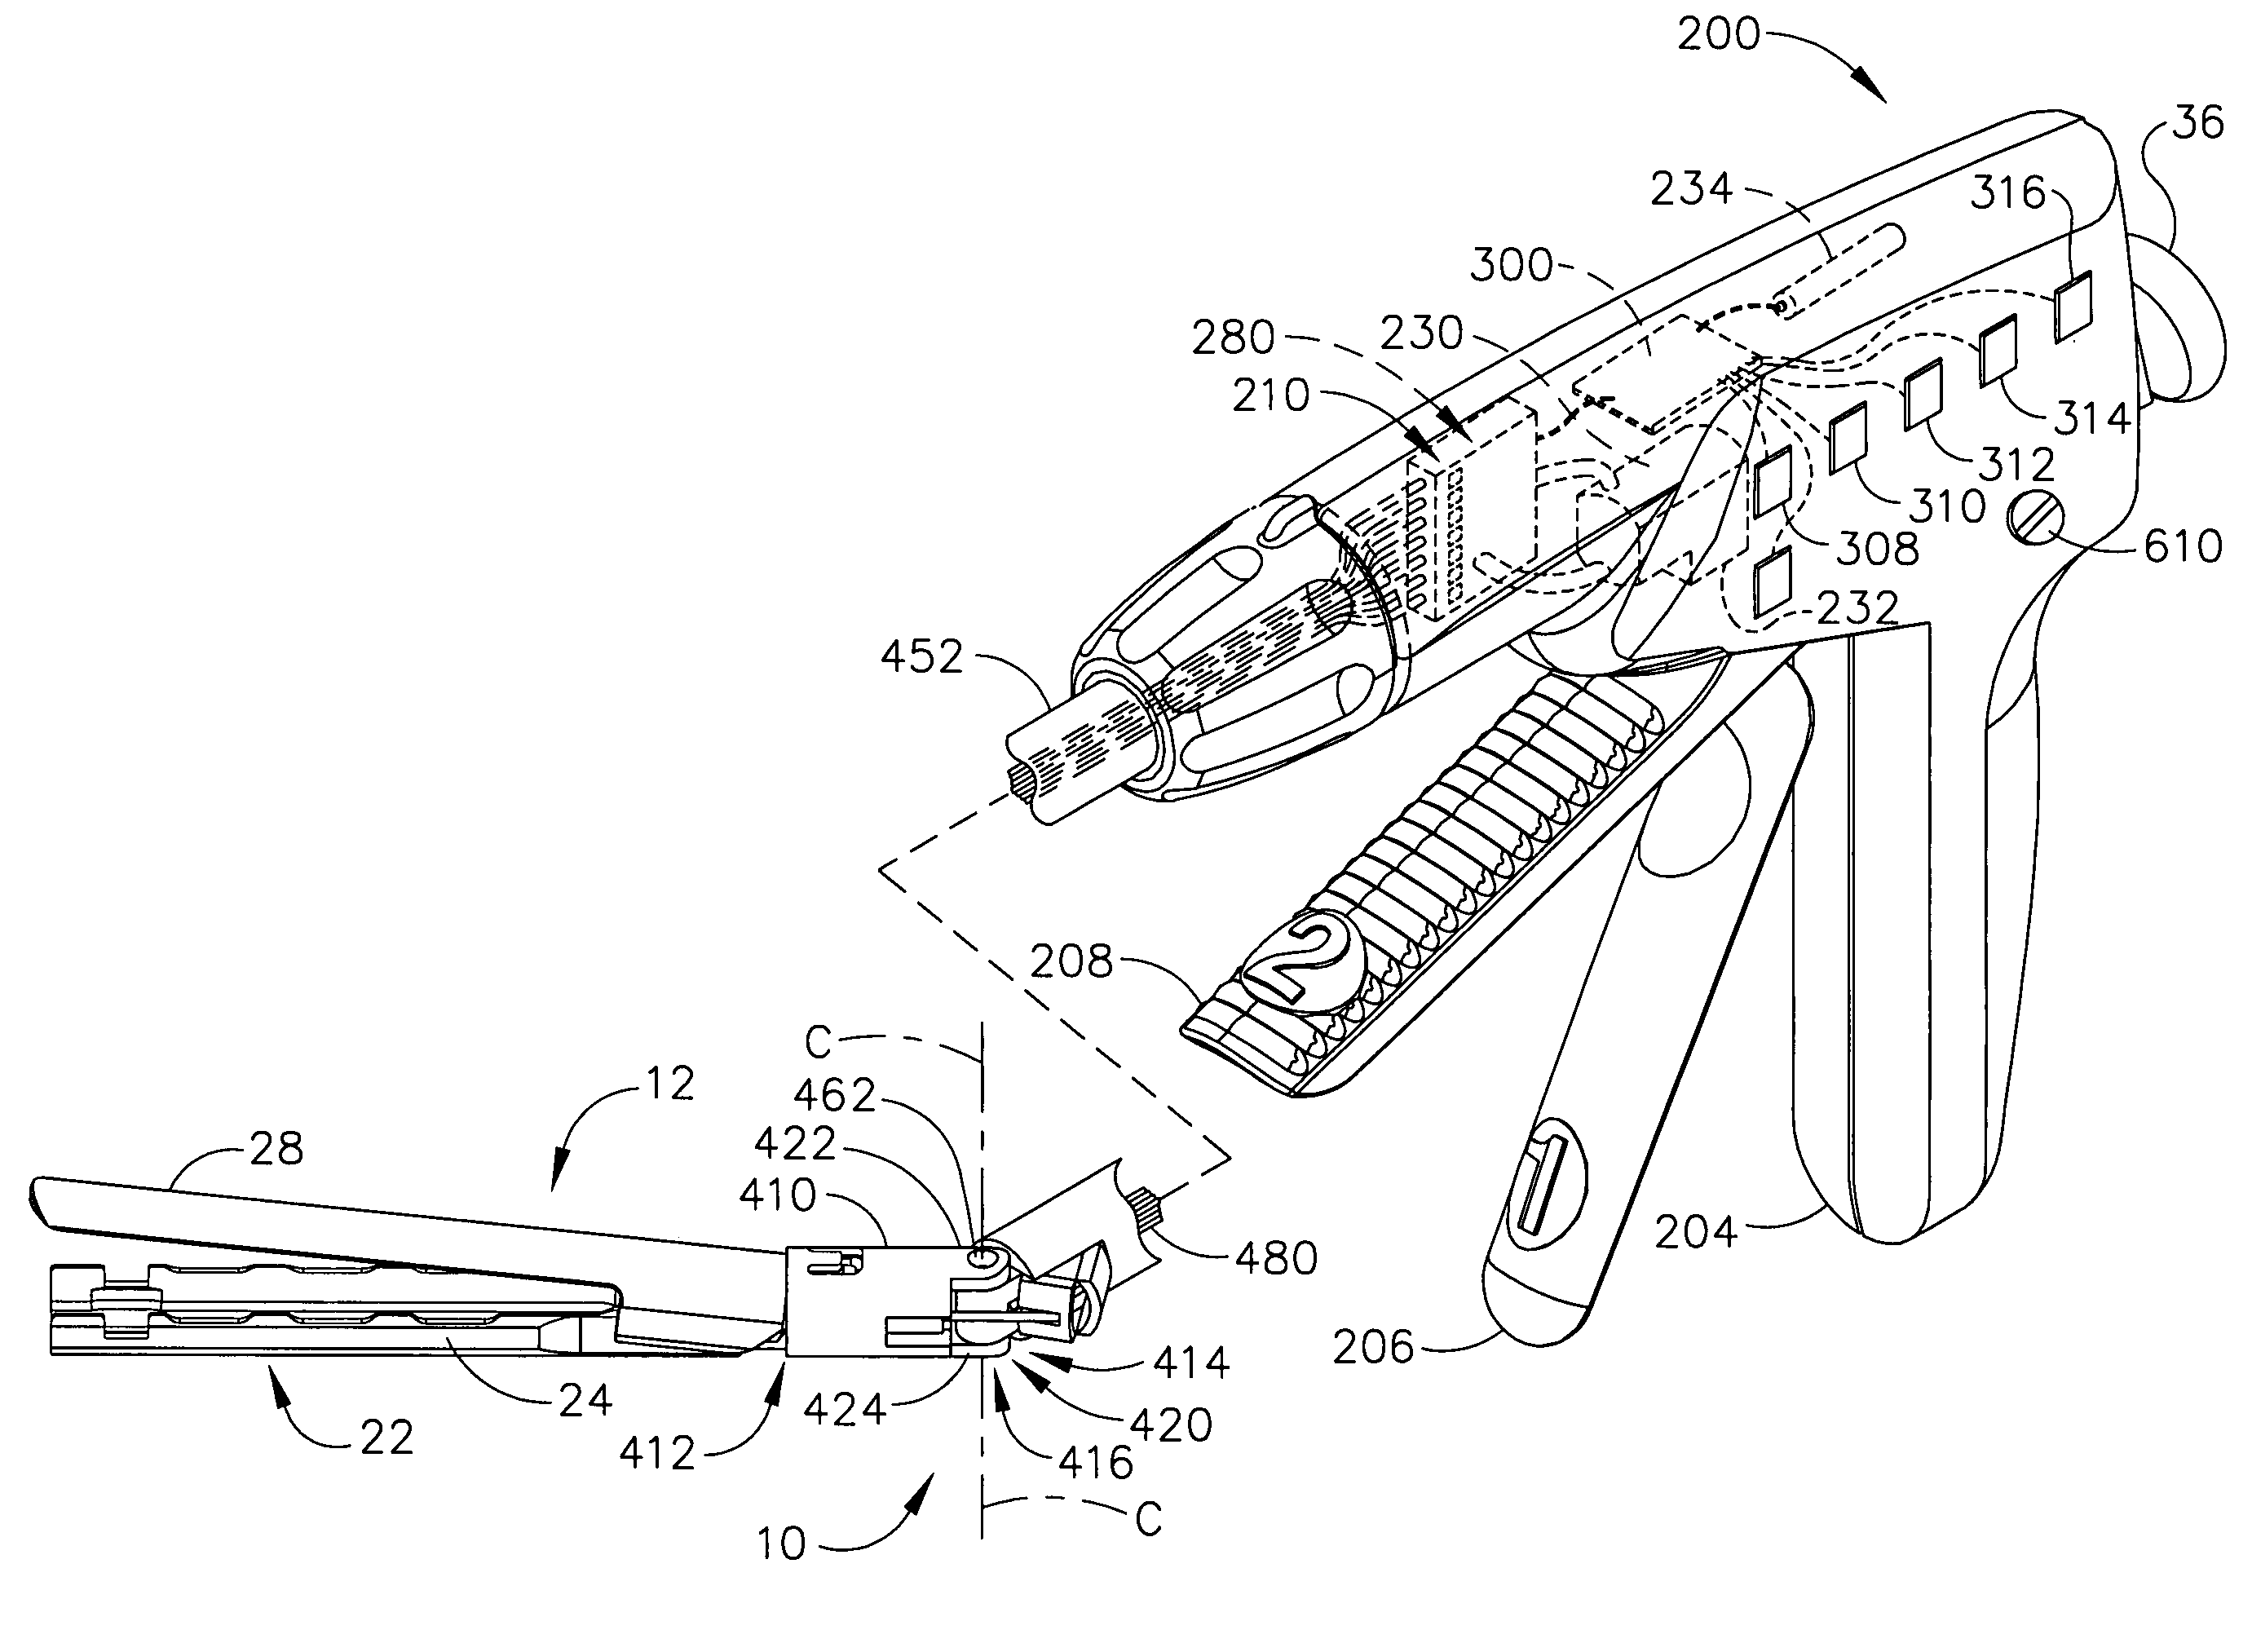 Articulation joint with improved moment arm extension for articulating an end effector of a surgical instrument